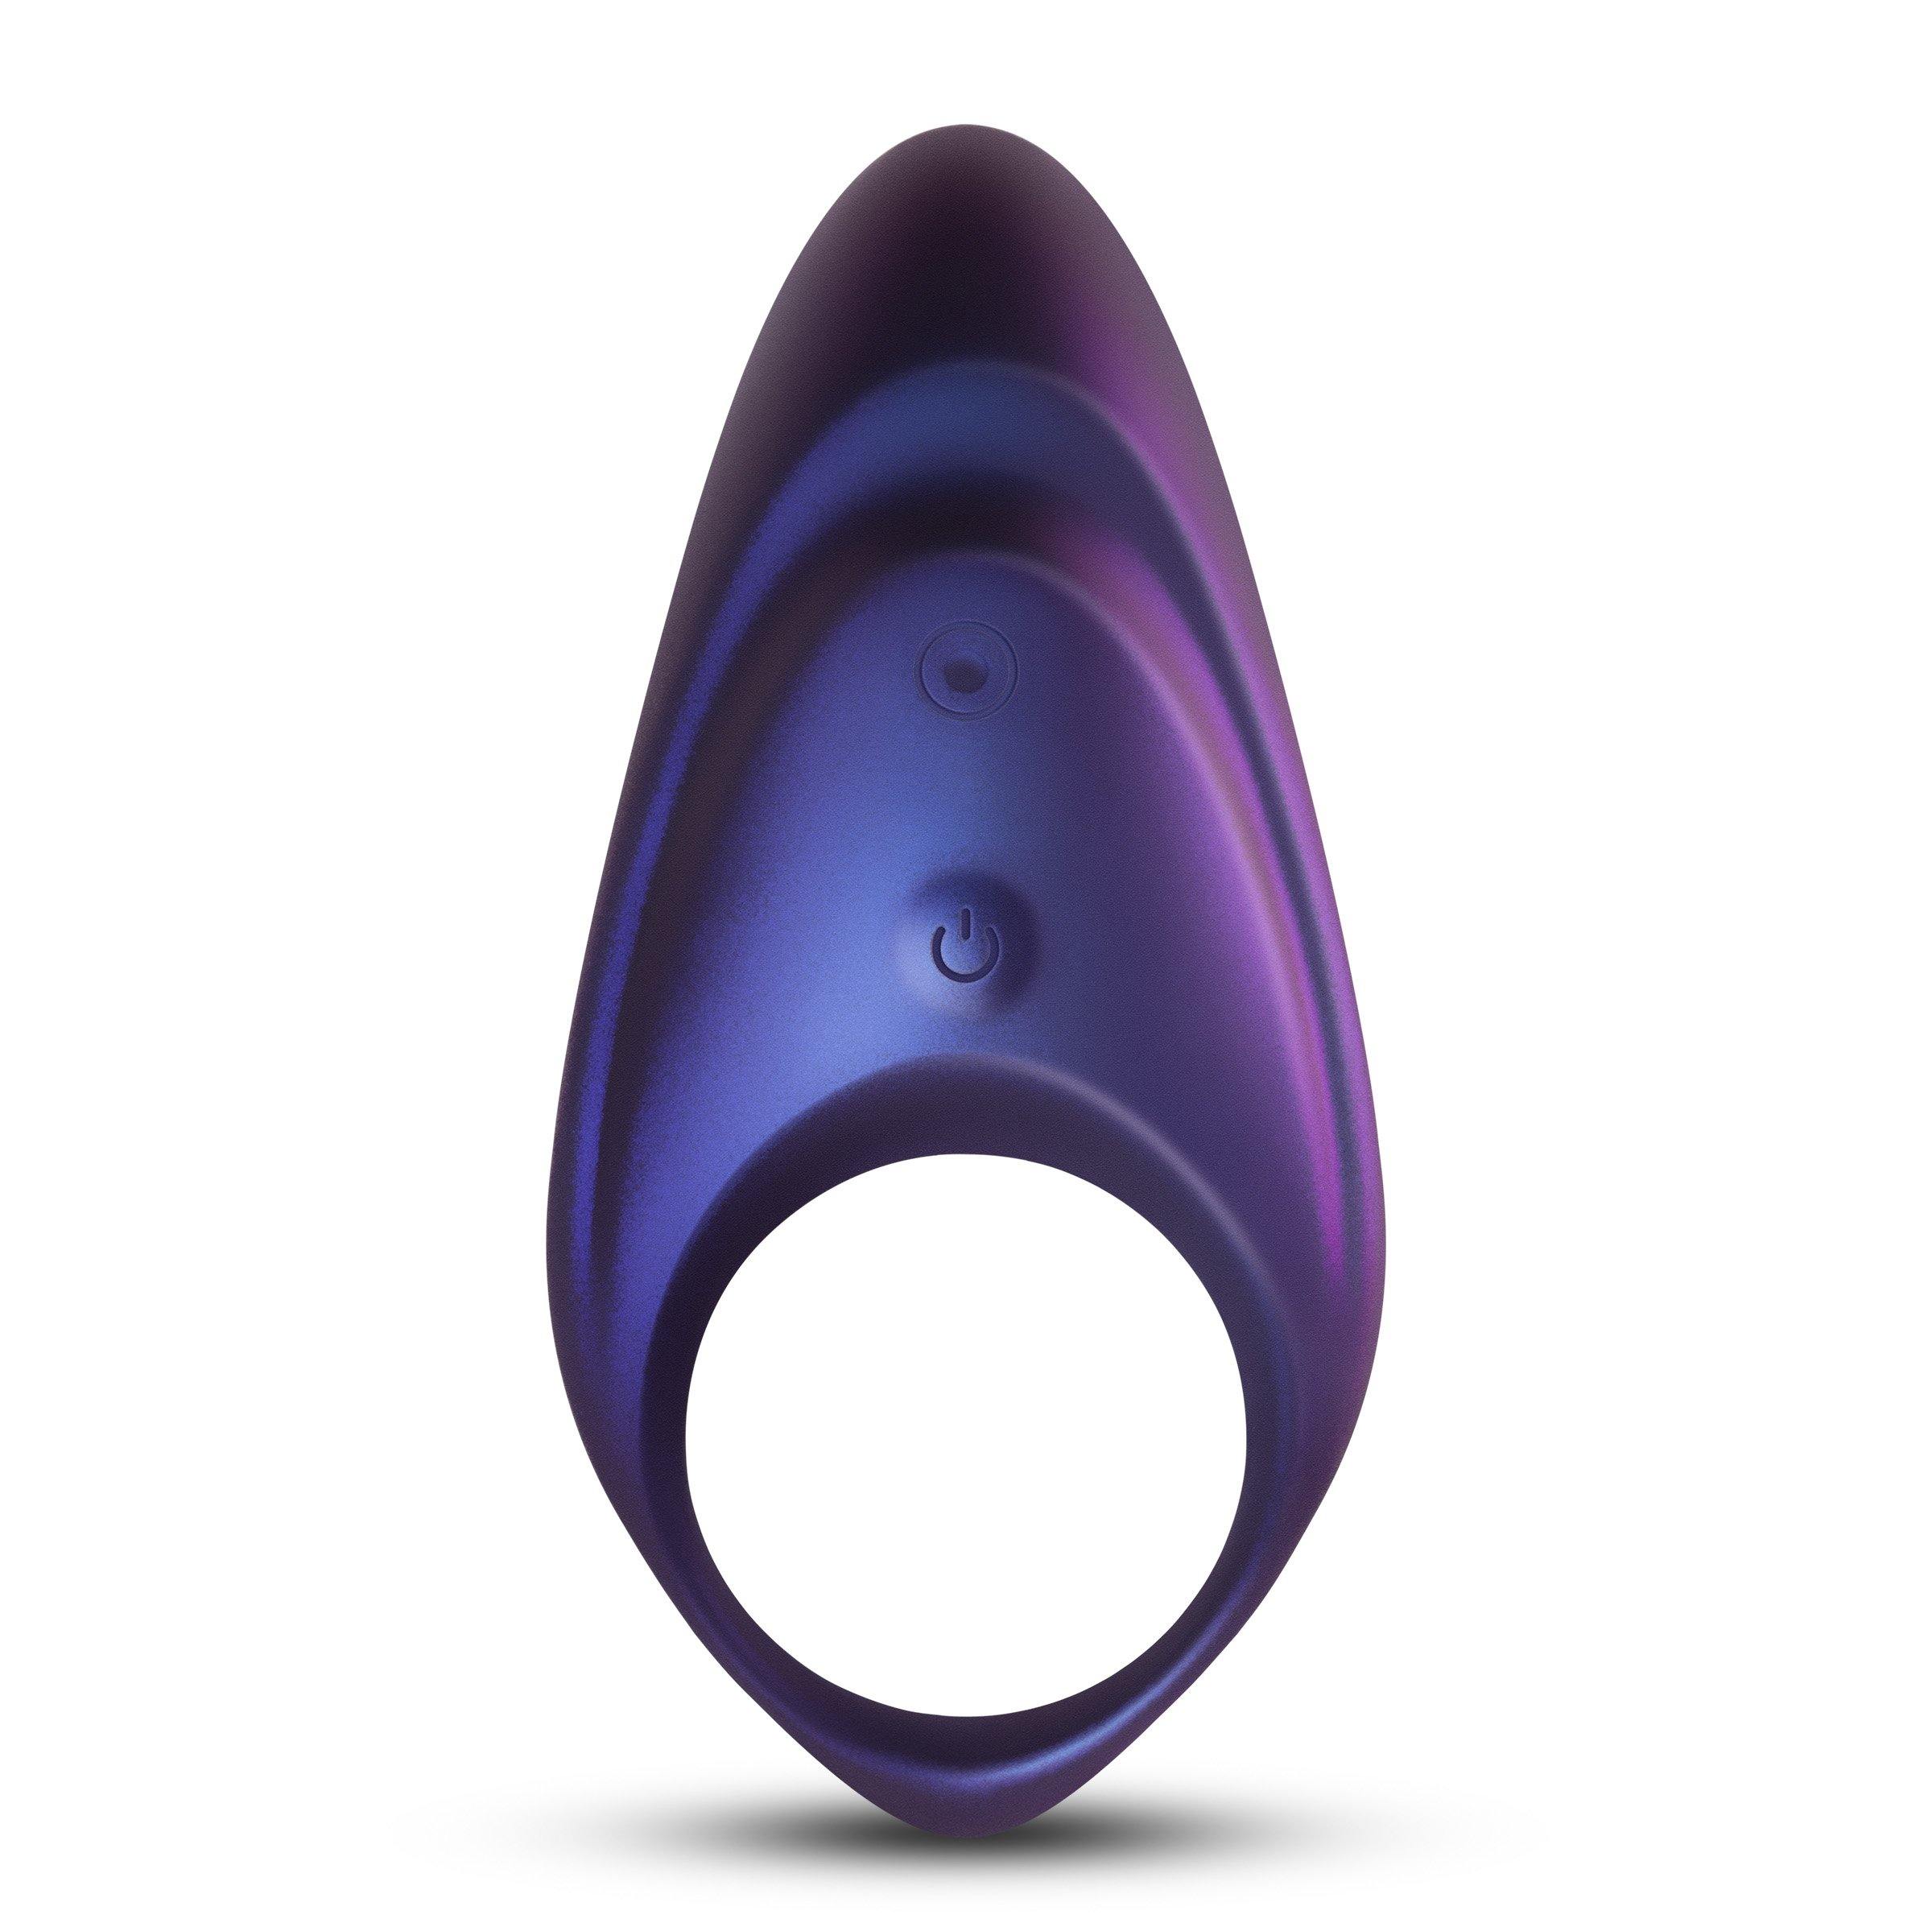 Hueman Neptune Vibrating Cock Ring + Remote - Buy At Luxury Toy X - Free 3-Day Shipping